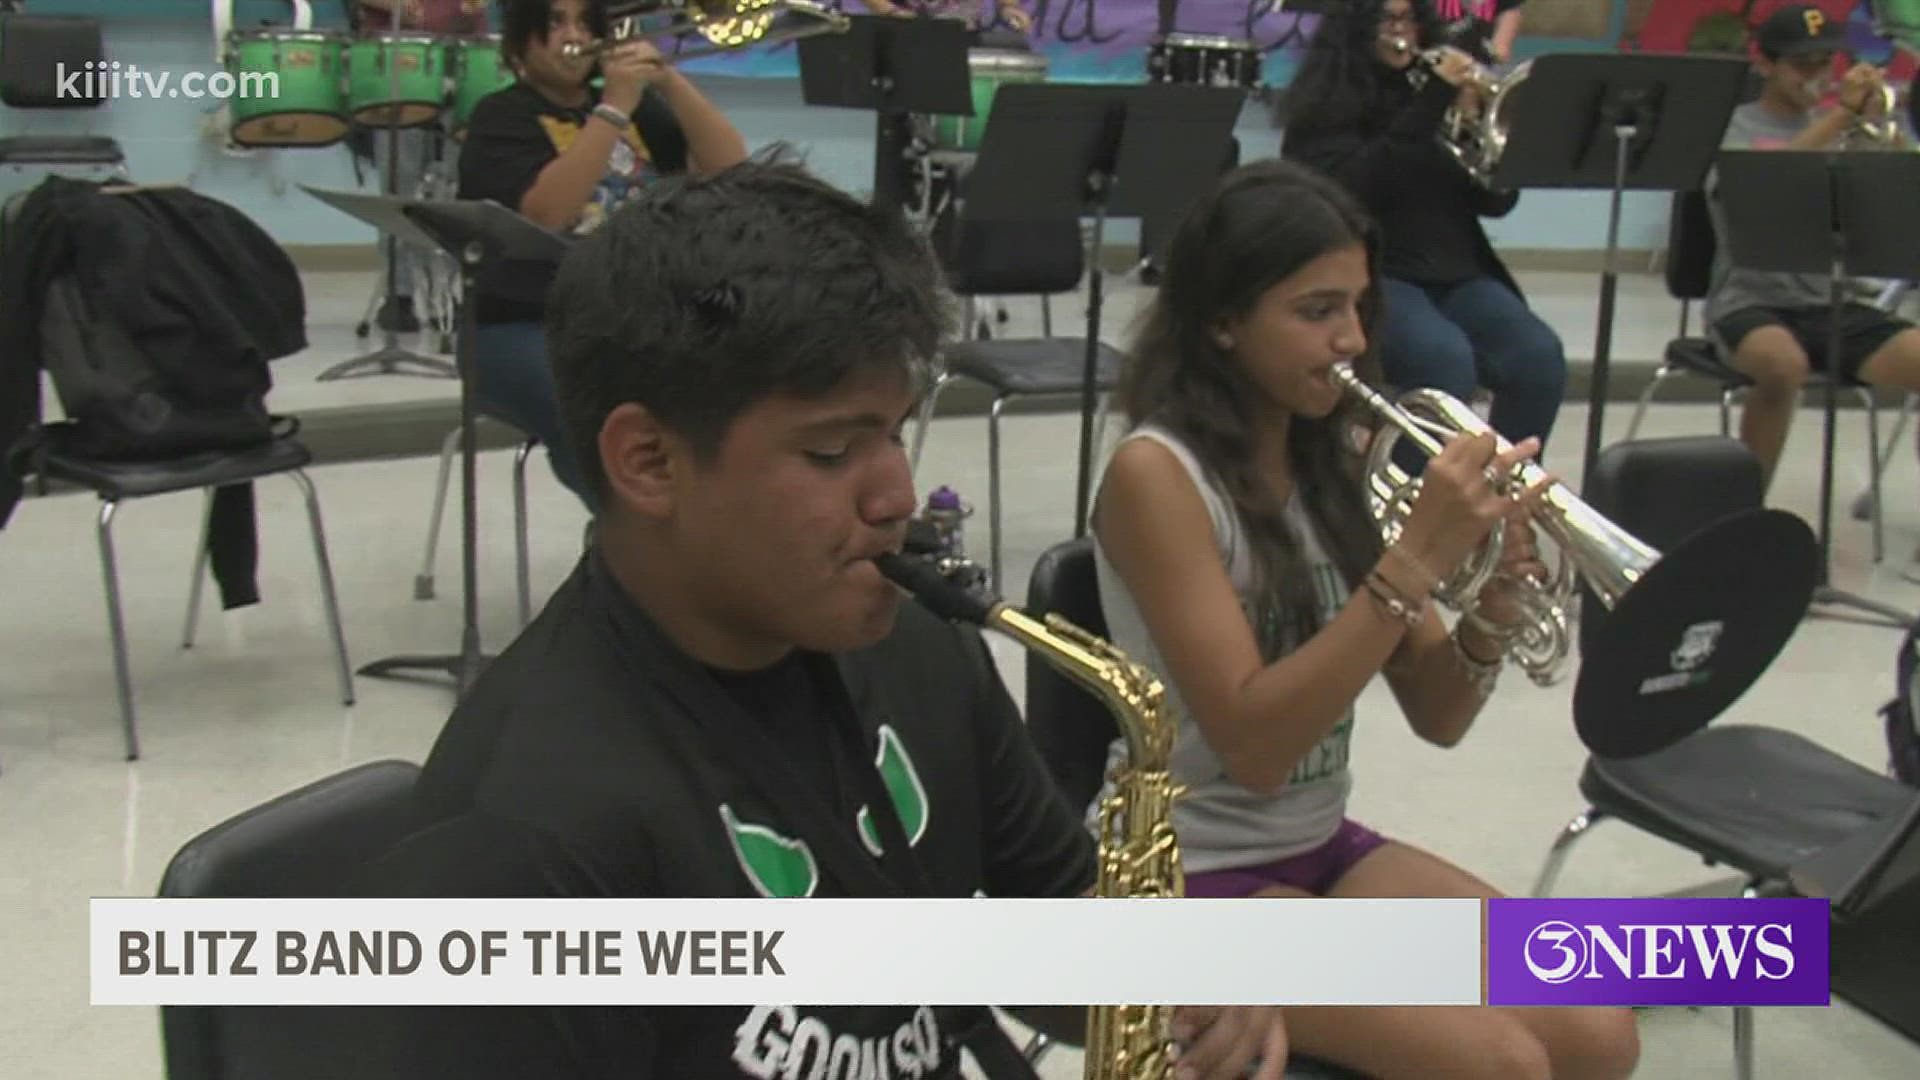 Banquete beat out Refugio in the online vote for the Week 9 Band of the Week honor.